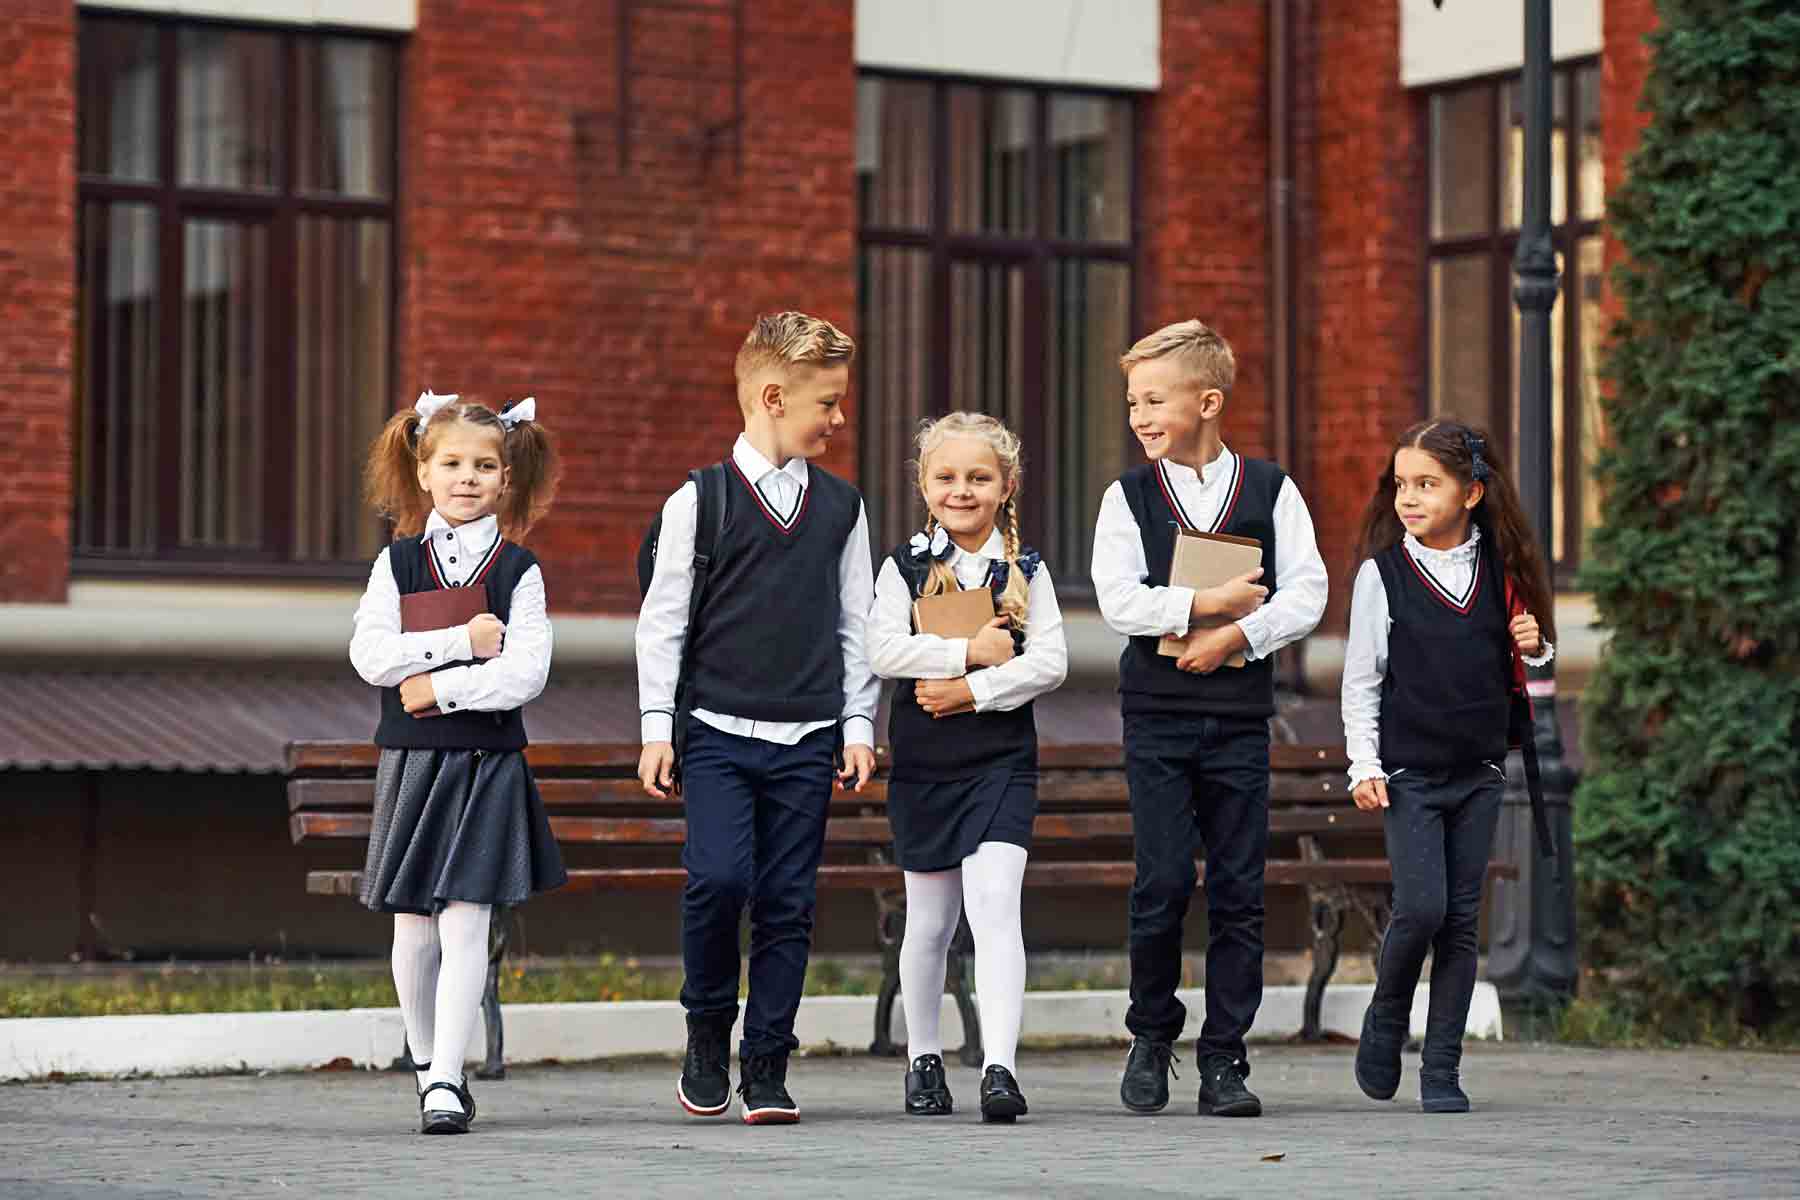 Children in their private school uniforms in front of a school building